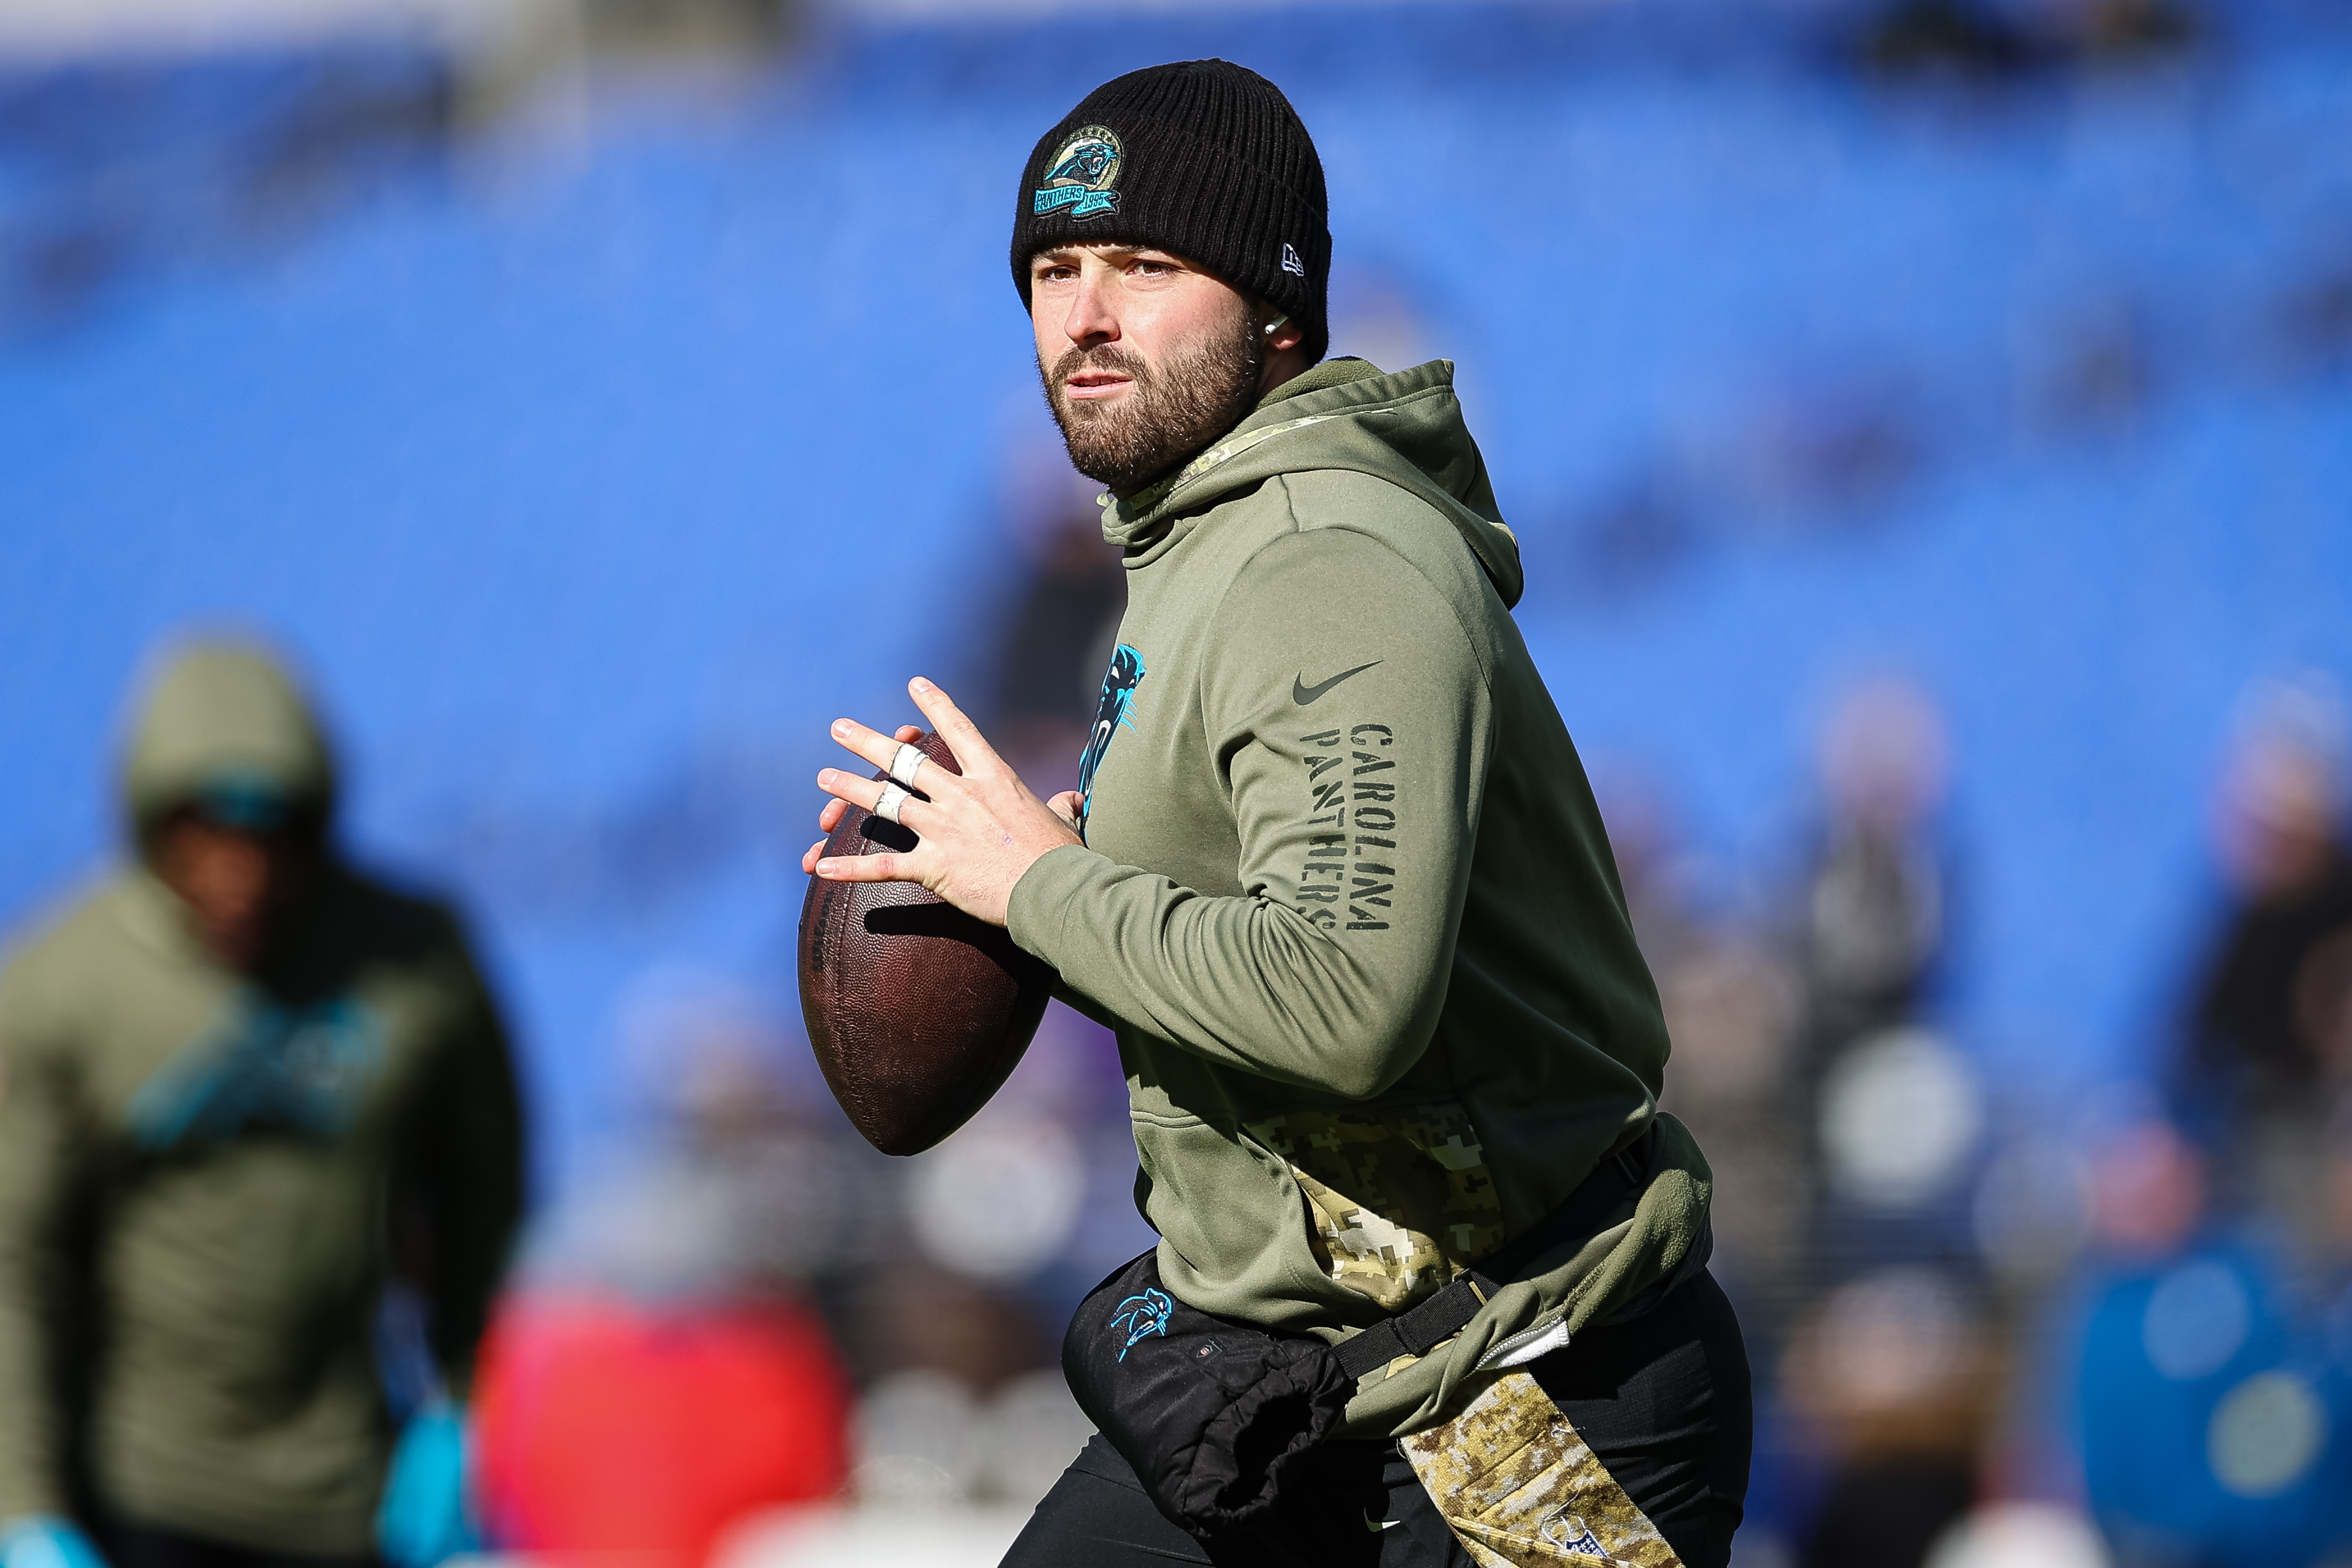 Quarterback Baker Mayfield of the Carolina Panthers warms up ahead of the game against the Baltimore Ravens at M&T Bank Stadium in Baltimore, Maryland, November 20, 2022. /CFP 